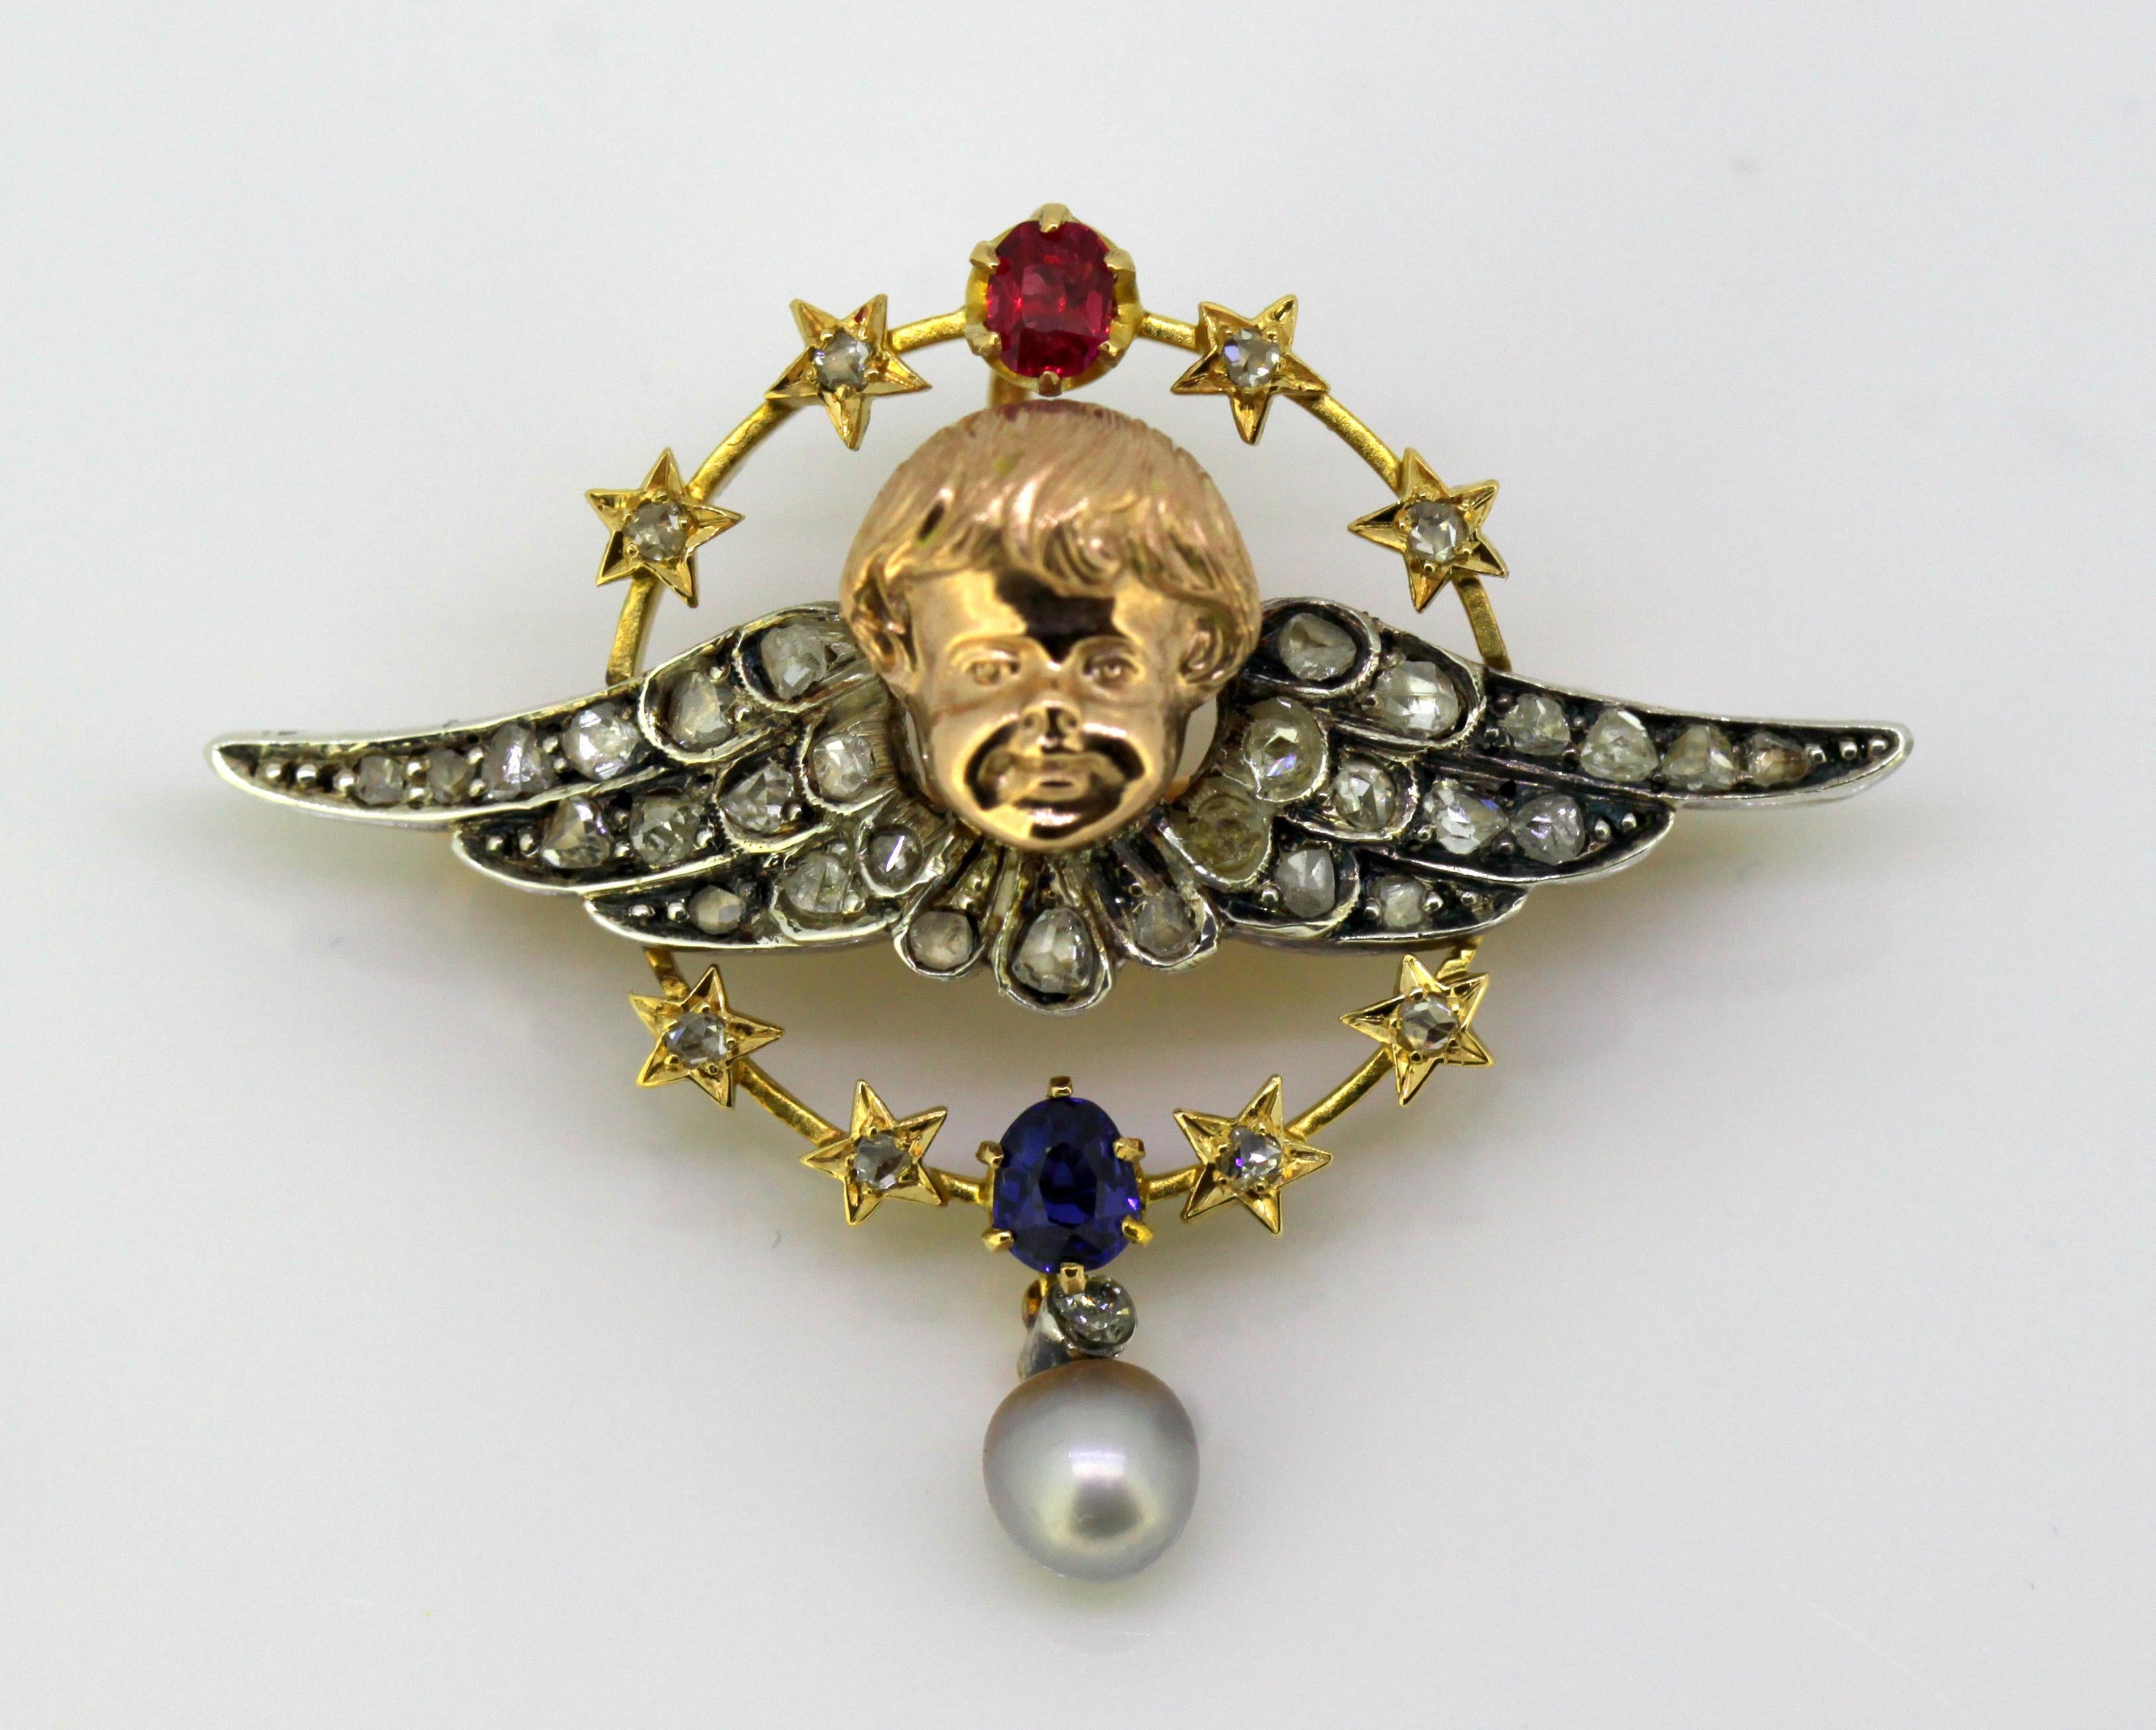 Antique 15k yellow gold and sterling silver brooch / pendant with ruby, blue sapphire, south sea pearl and diamonds.

Maker : W. Rummel

Made in Prague Circa 1880's

Approx Dimensions - 
Size : 3.6 x 3 x 1.3 cm
Weight : 9 grams

Diamonds - 
Cut :